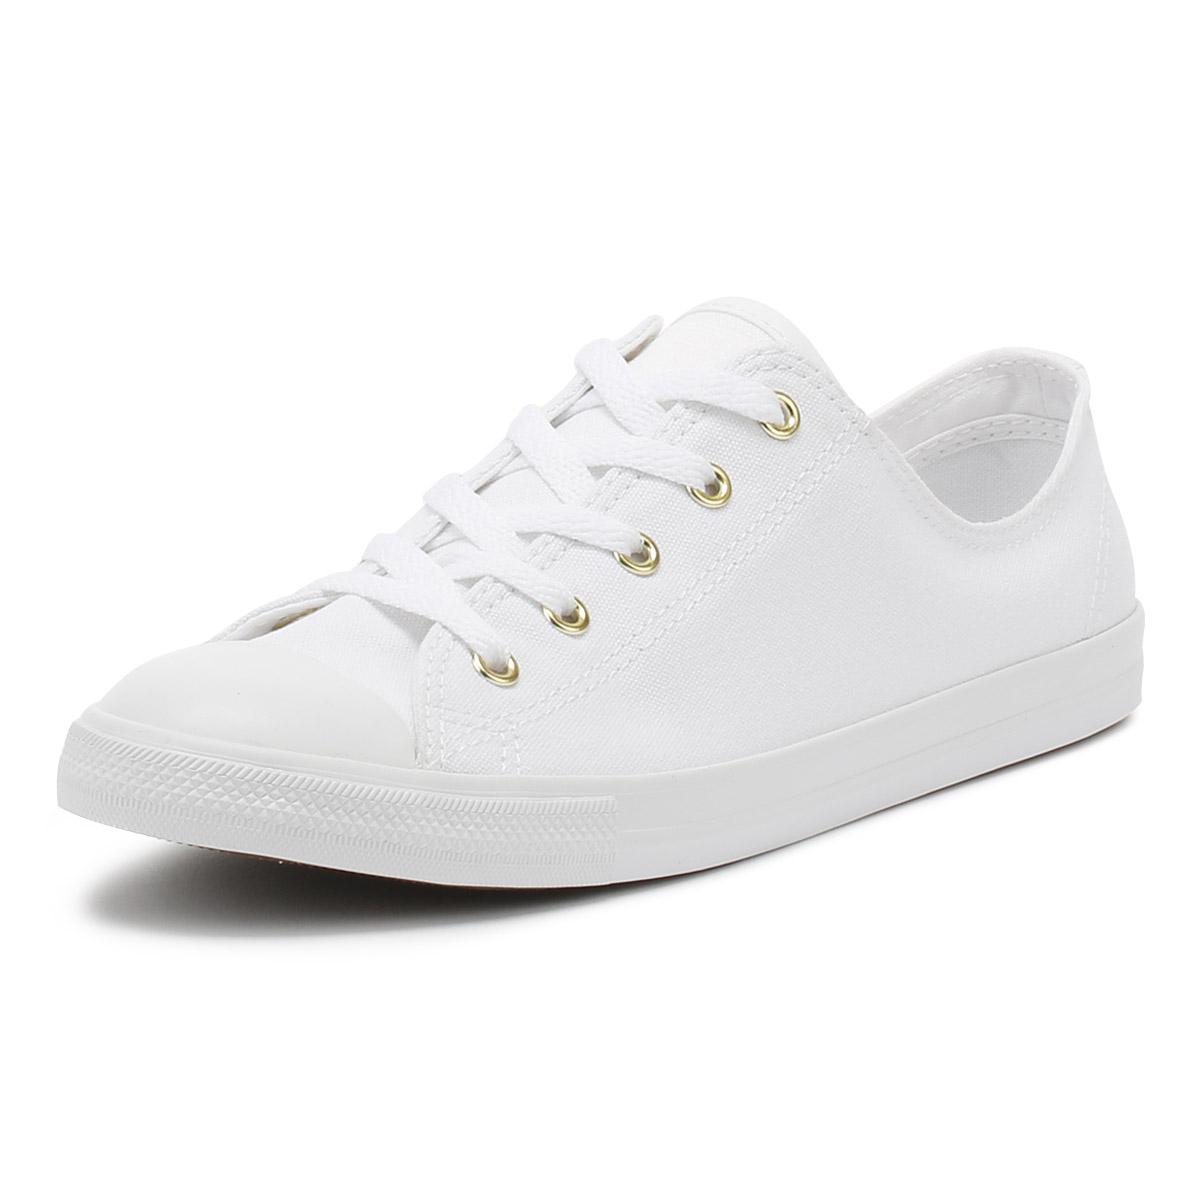 converse dainty ox white gold